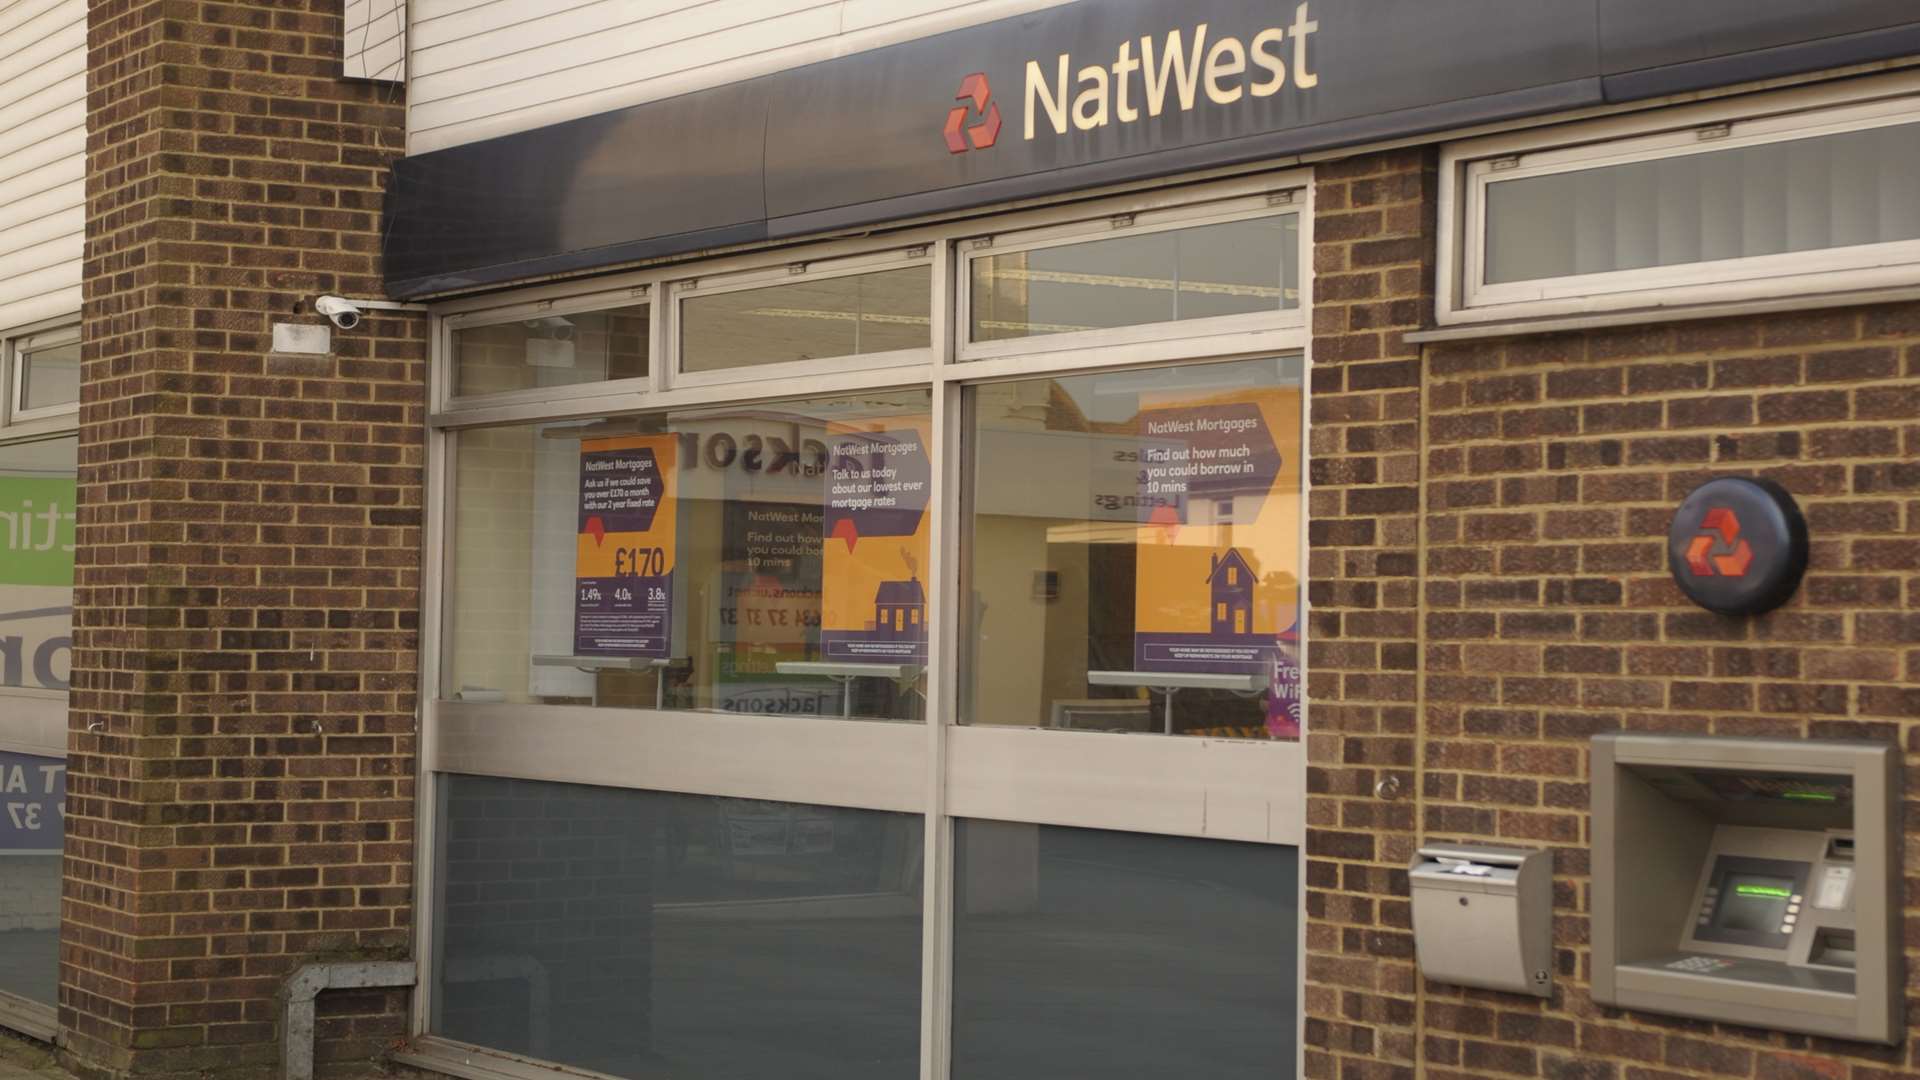 Weldrick targeted two NatWest banks